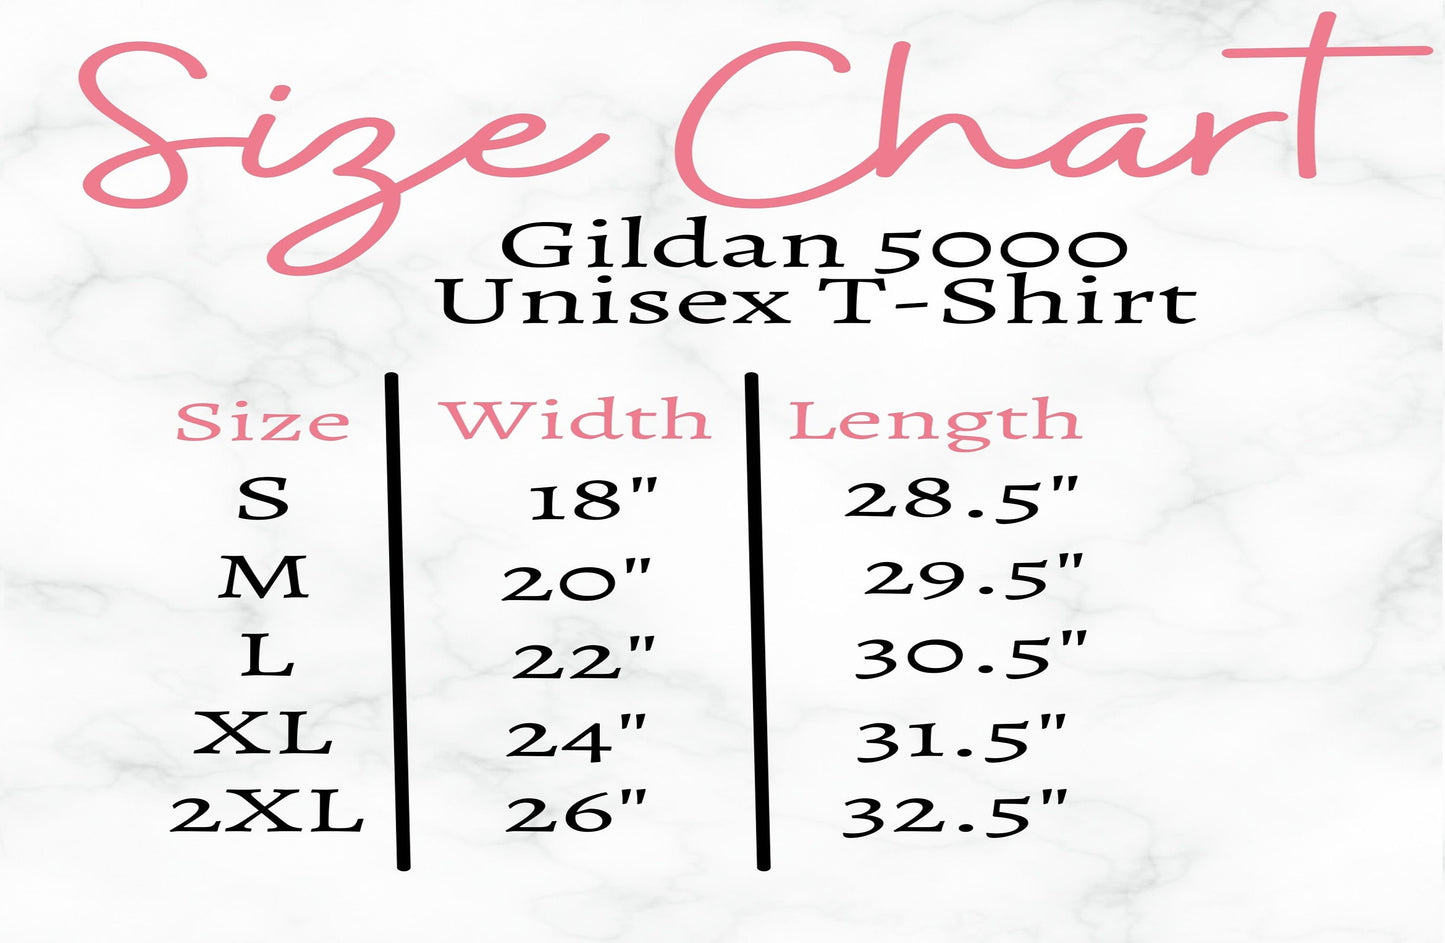 Santa's Championship Sled Race: Christmas Team Competition Collectible Series Tshirt Team 4 - Winter Competition